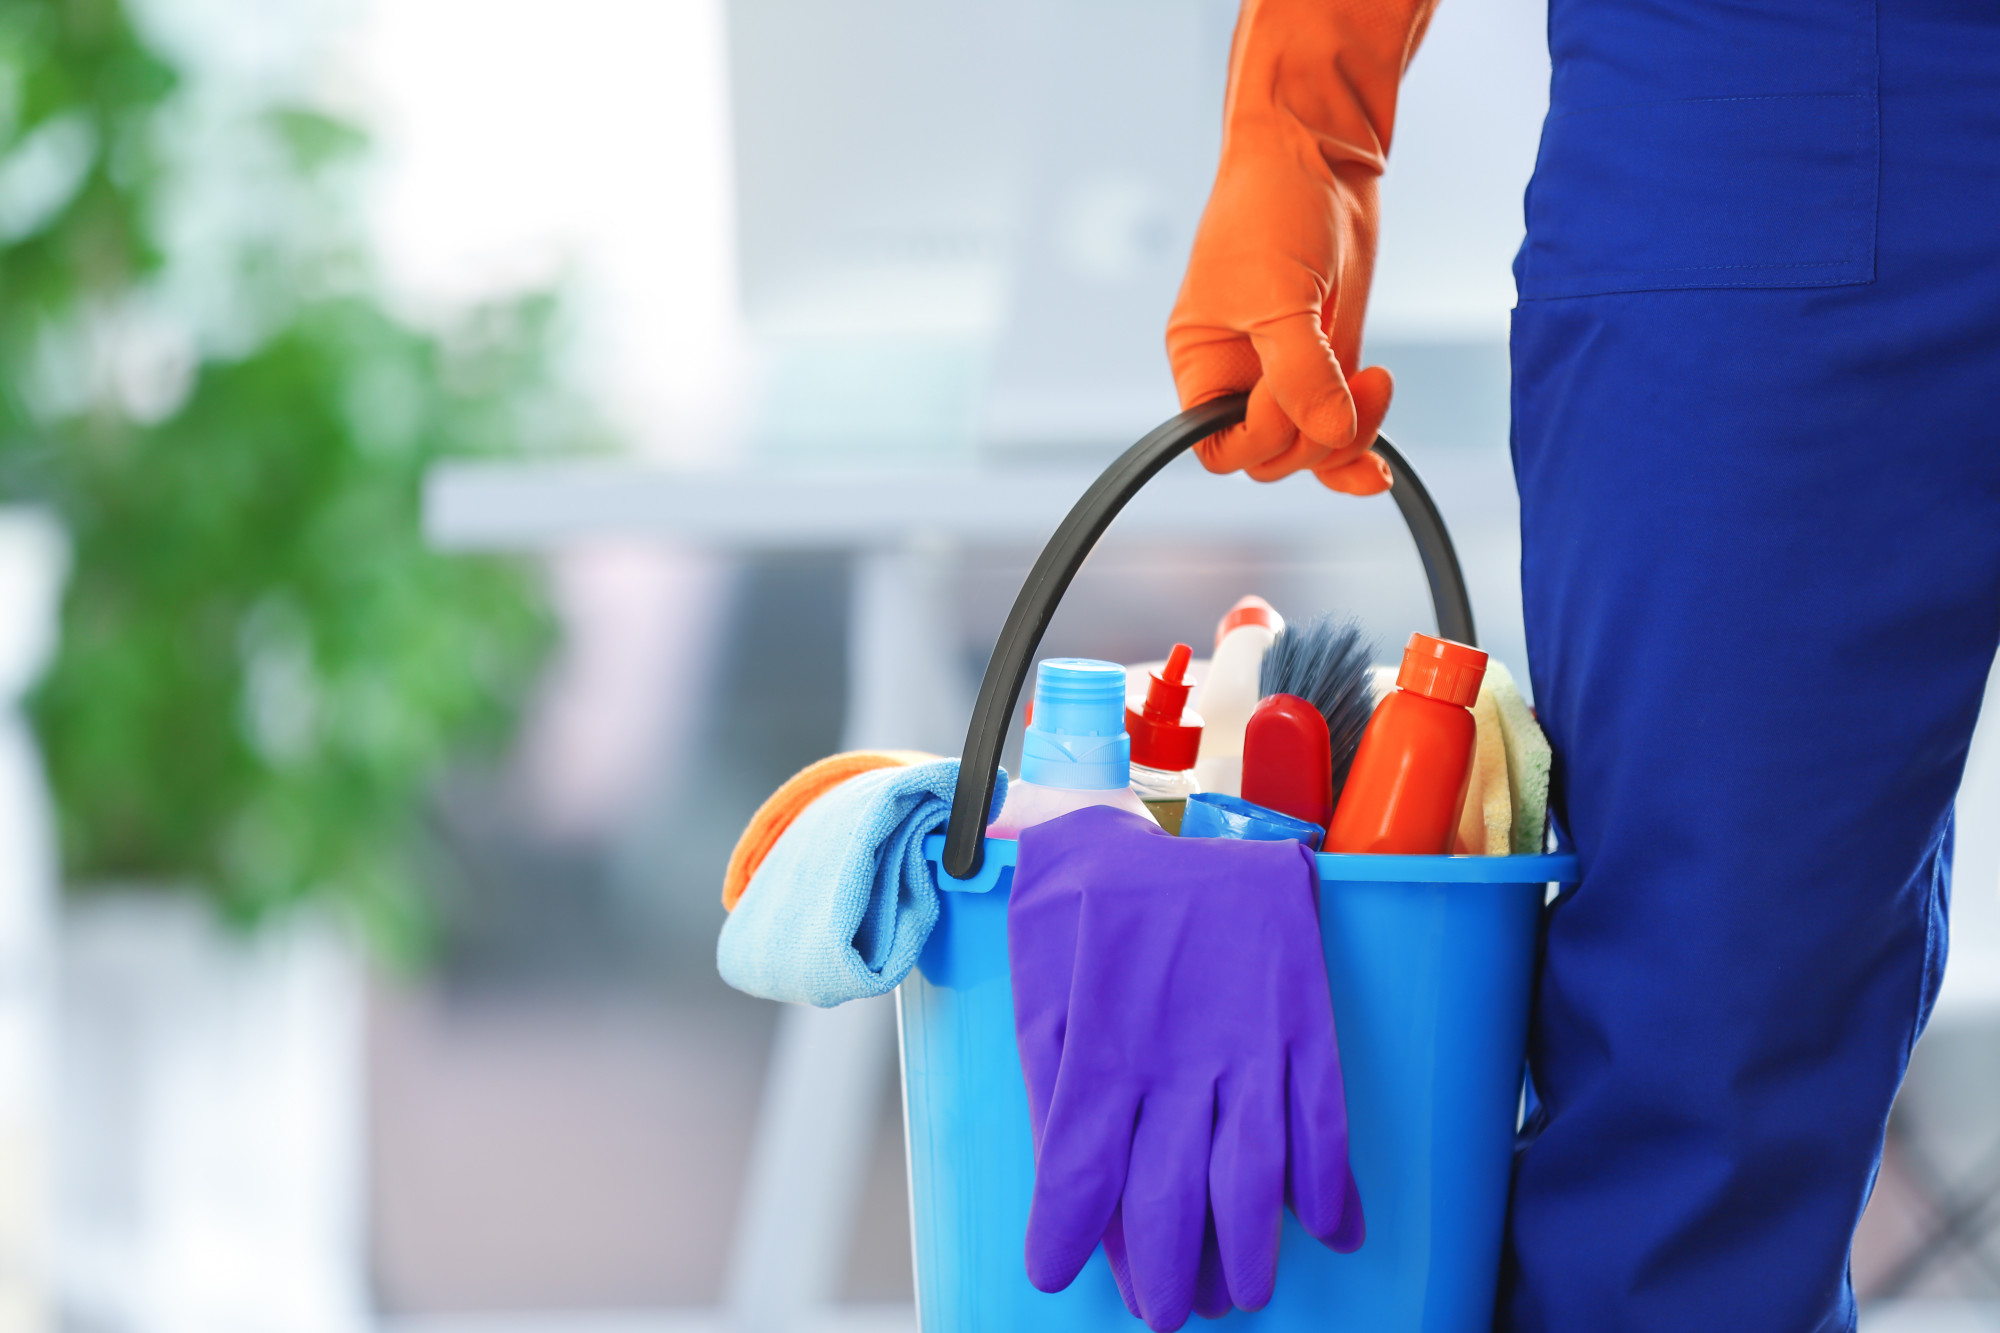 house cleaning services singapore